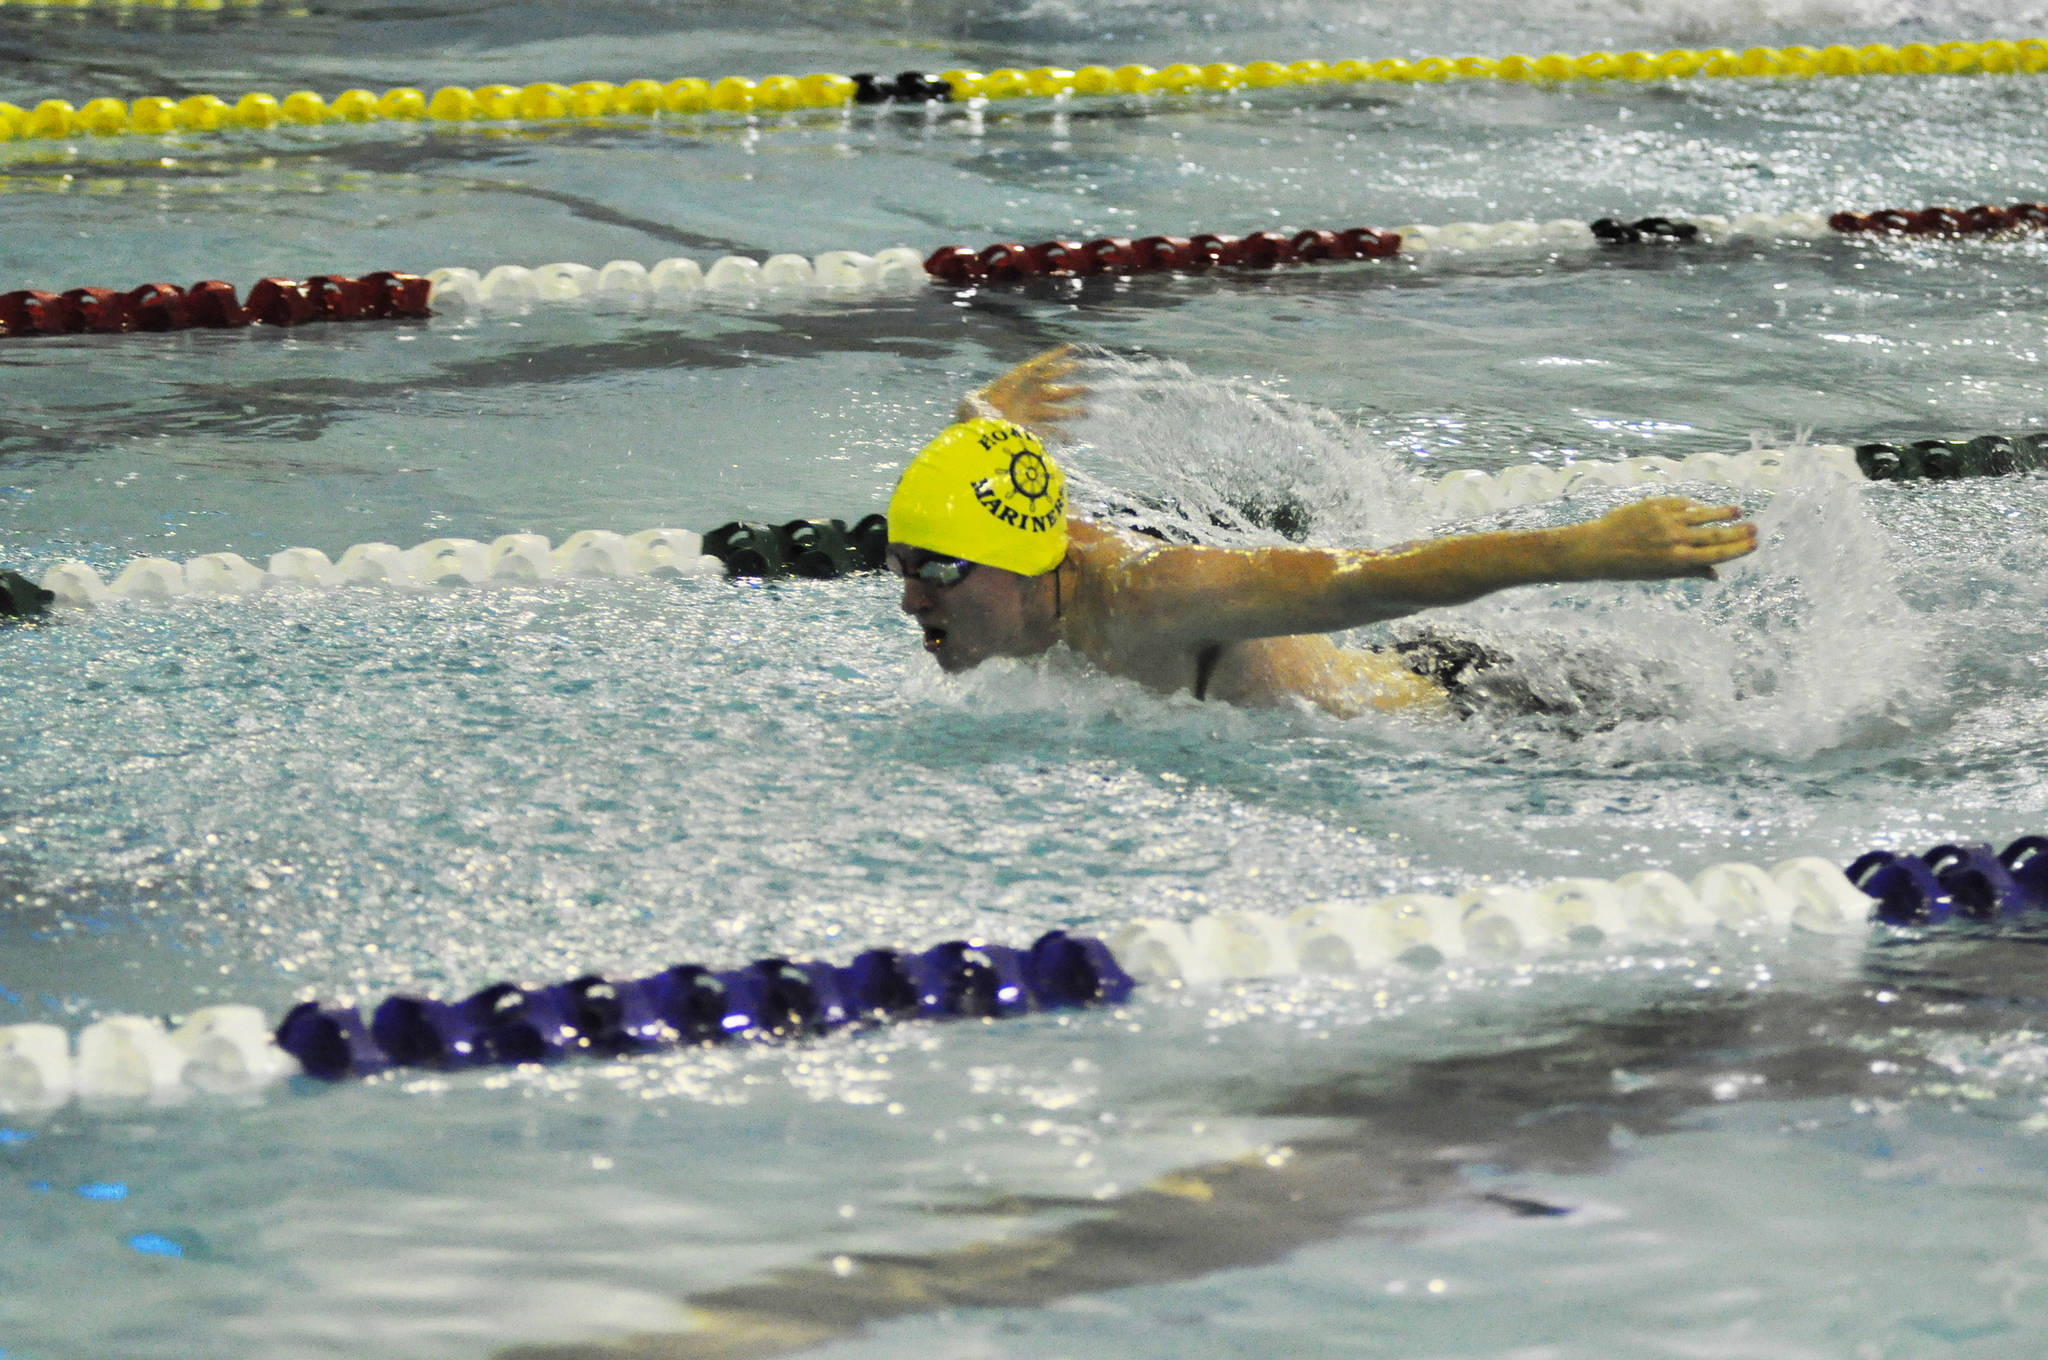 Senior Griffin Downey swims the fly leg of the boys individual medley at the Region III Swimming and Diving Championships held Friday and Saturday, Oct. 27-28, 2017 in Palmer, Alaska. The Homer Mariner girls took fourth overall. (Photo submitted)